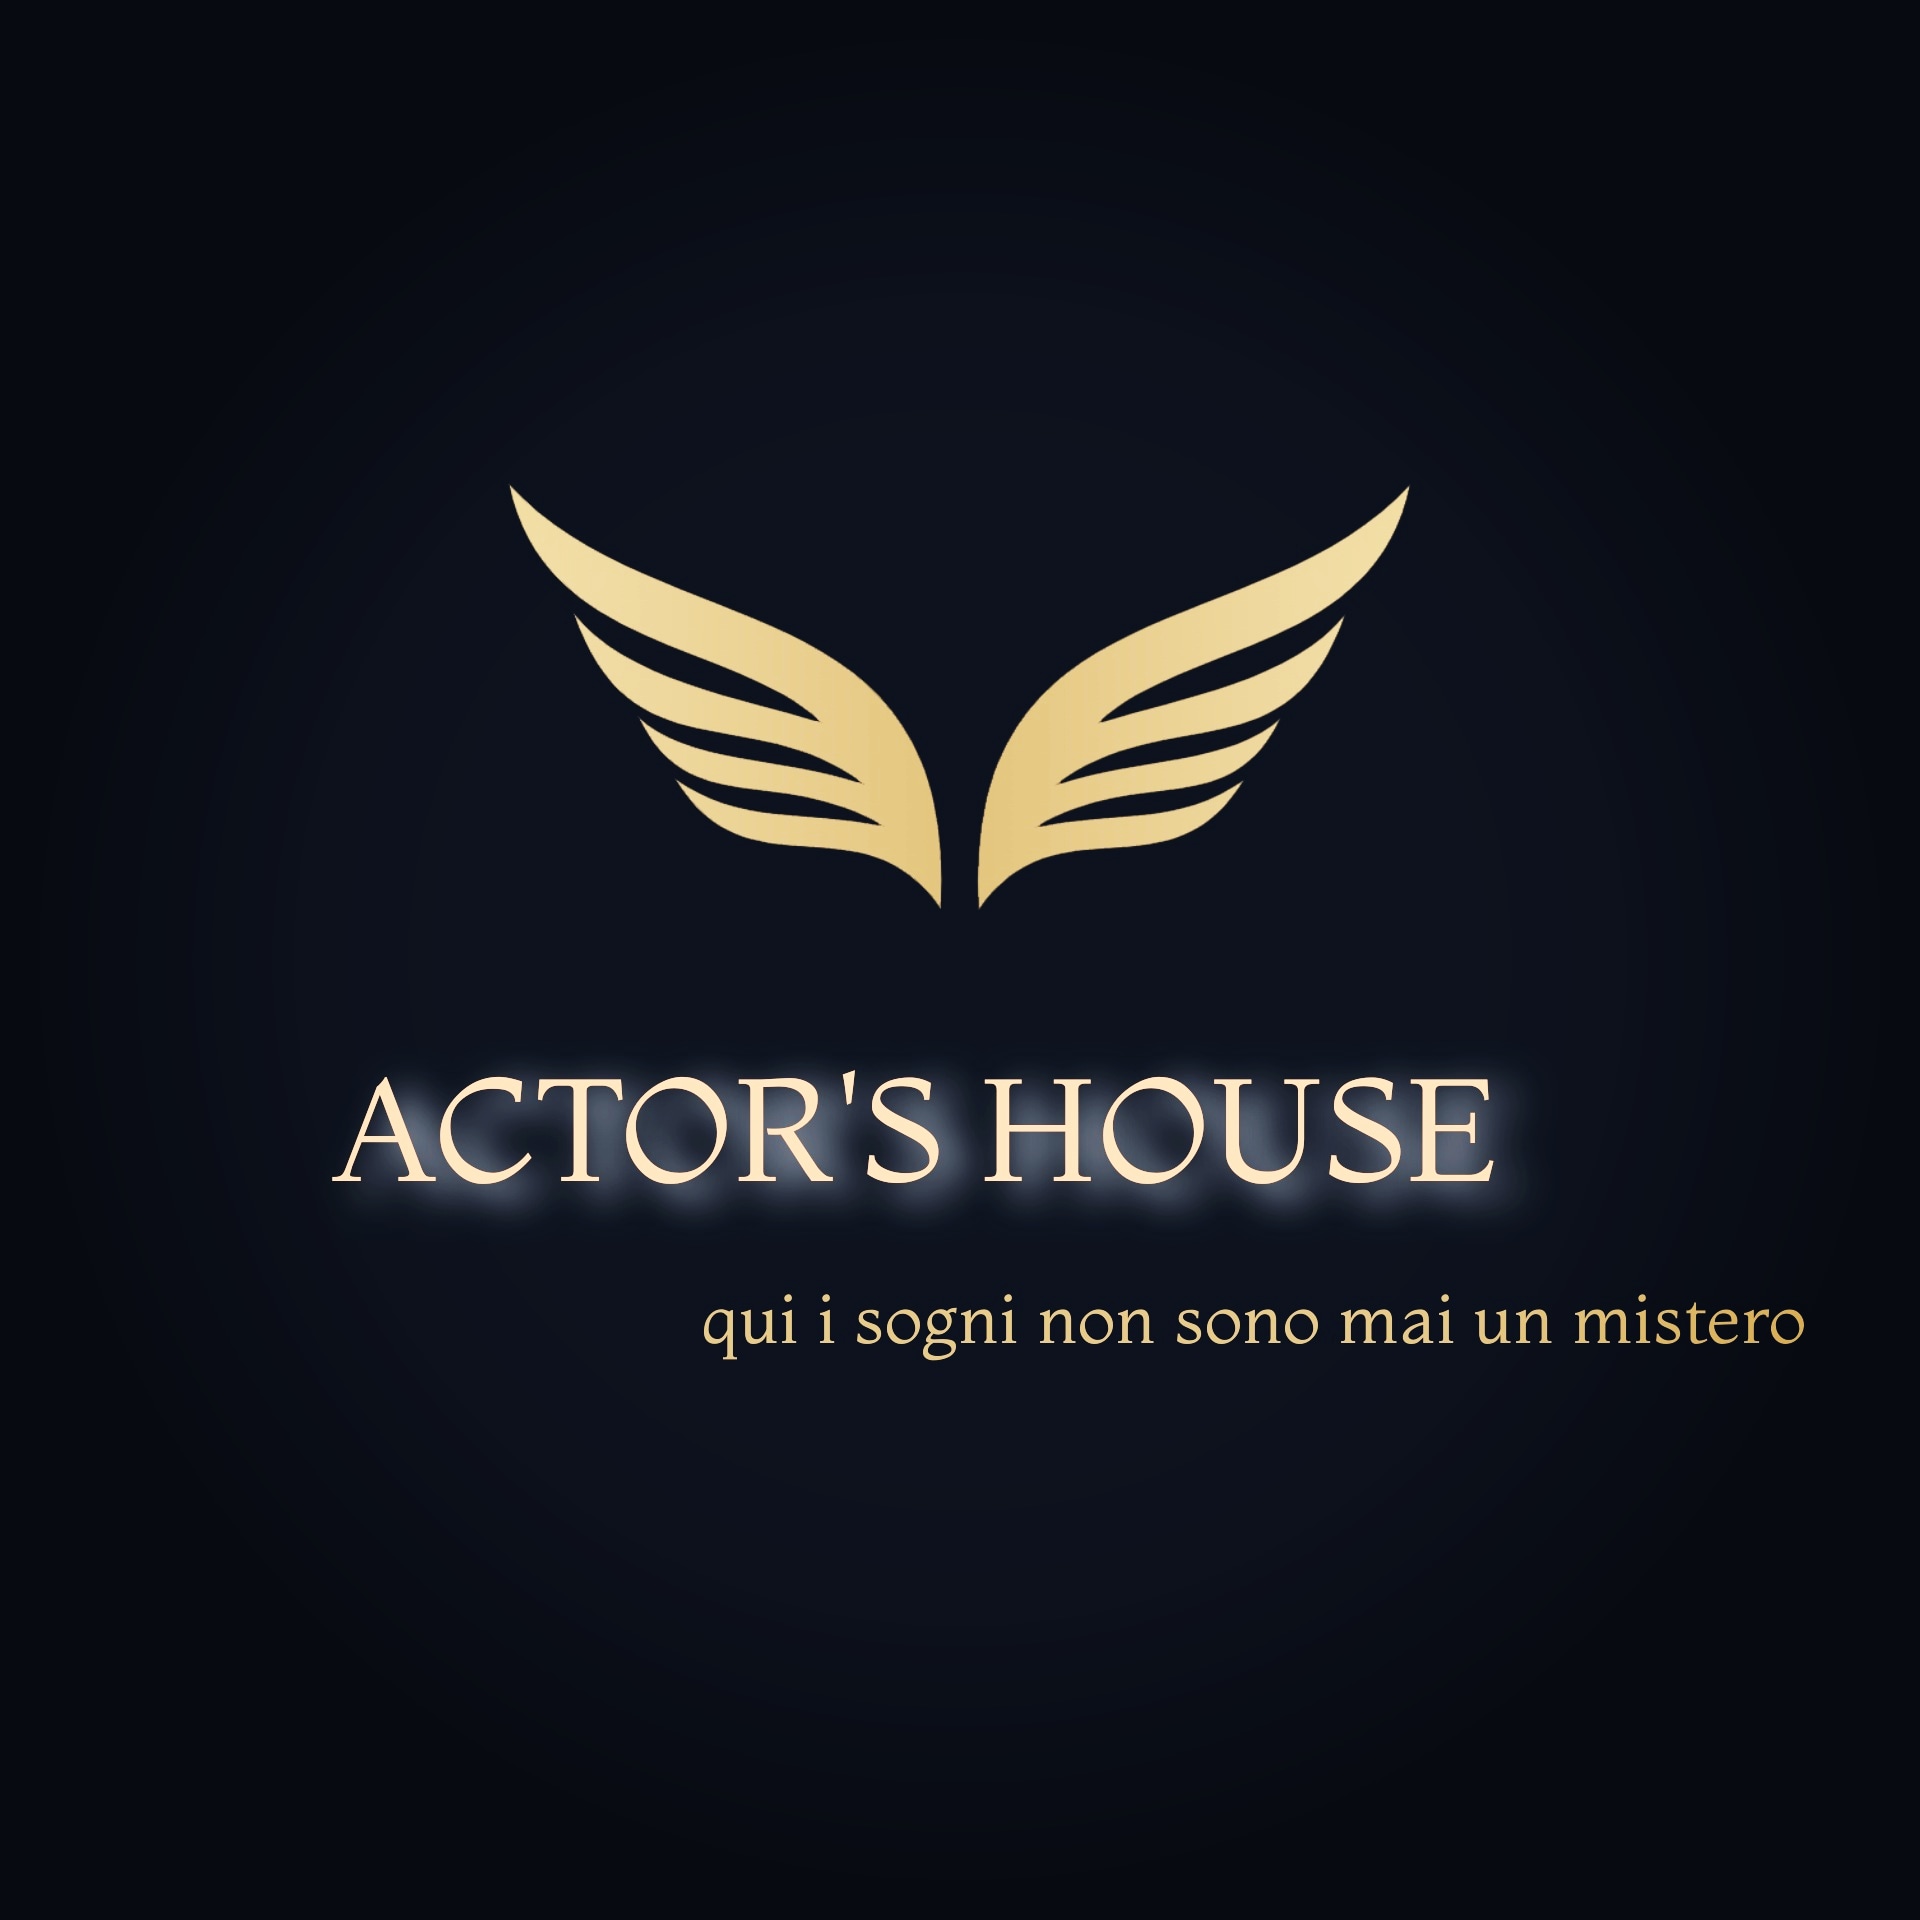 ACTOR'S HOUSE